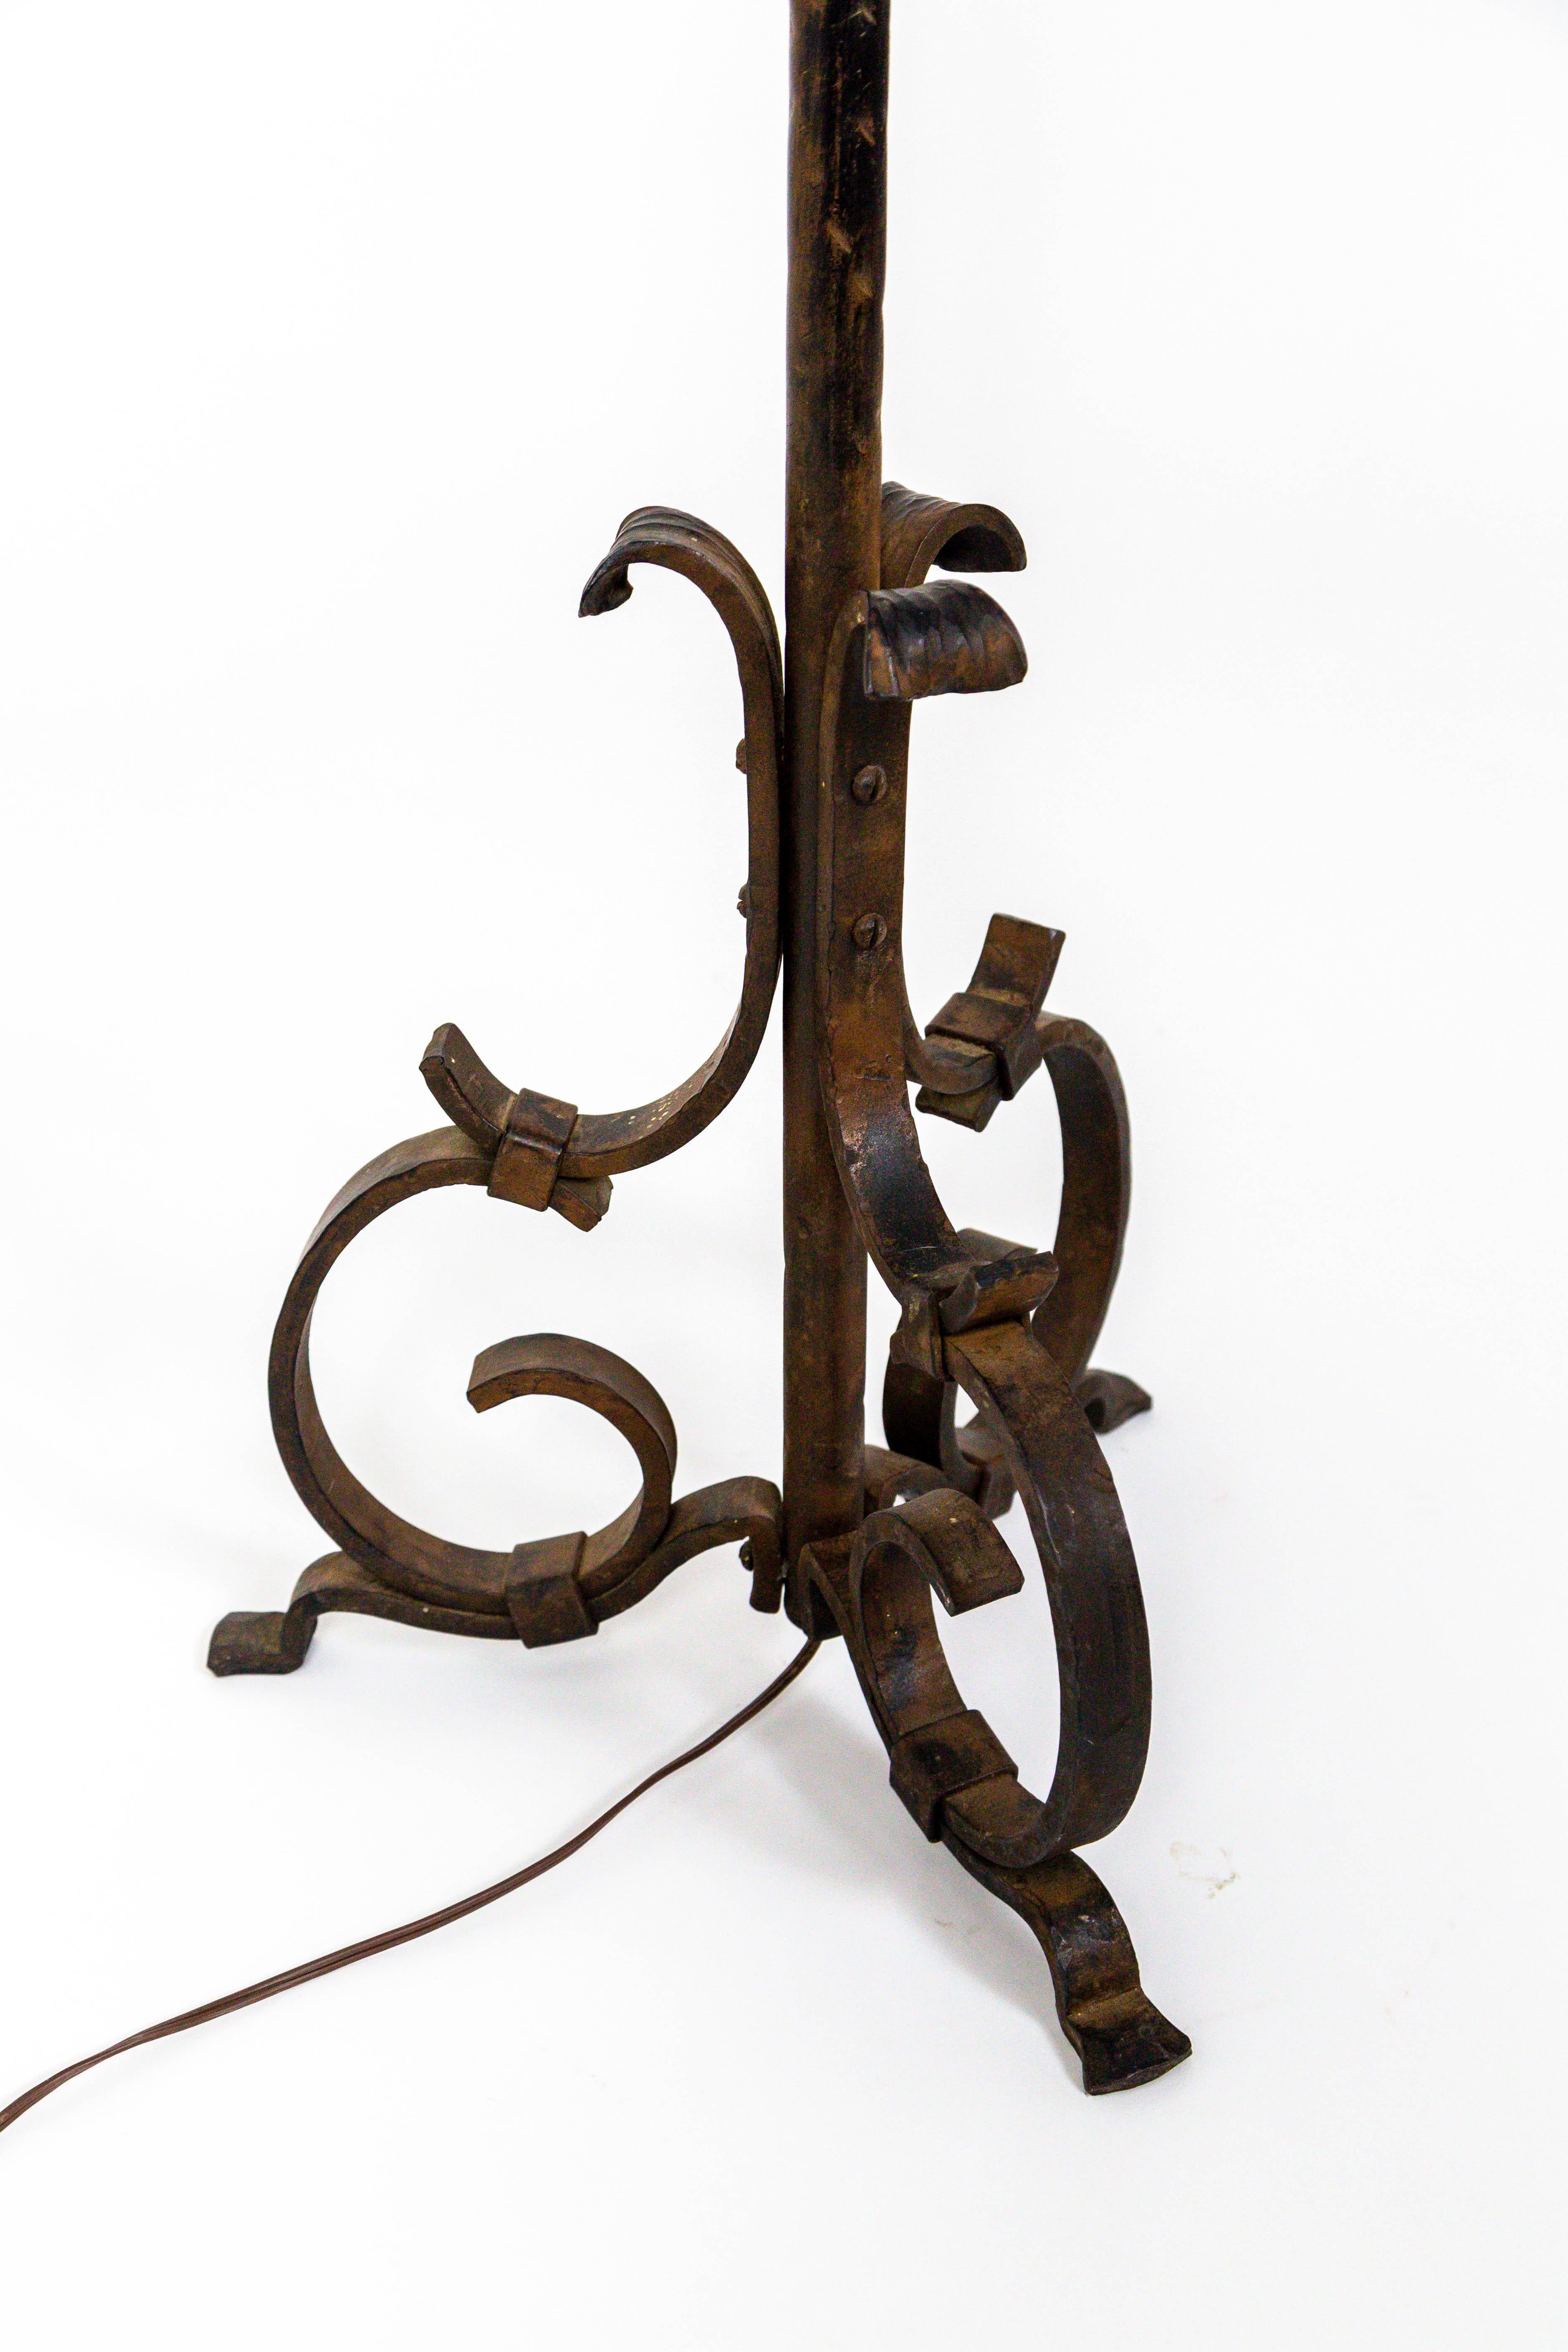 A beautiful, French, handwrought iron floor lamp with Renaissance Revival influences; textural, hammered accents, and leaf details on the stem, circa late 1930s. Measures: 67.75